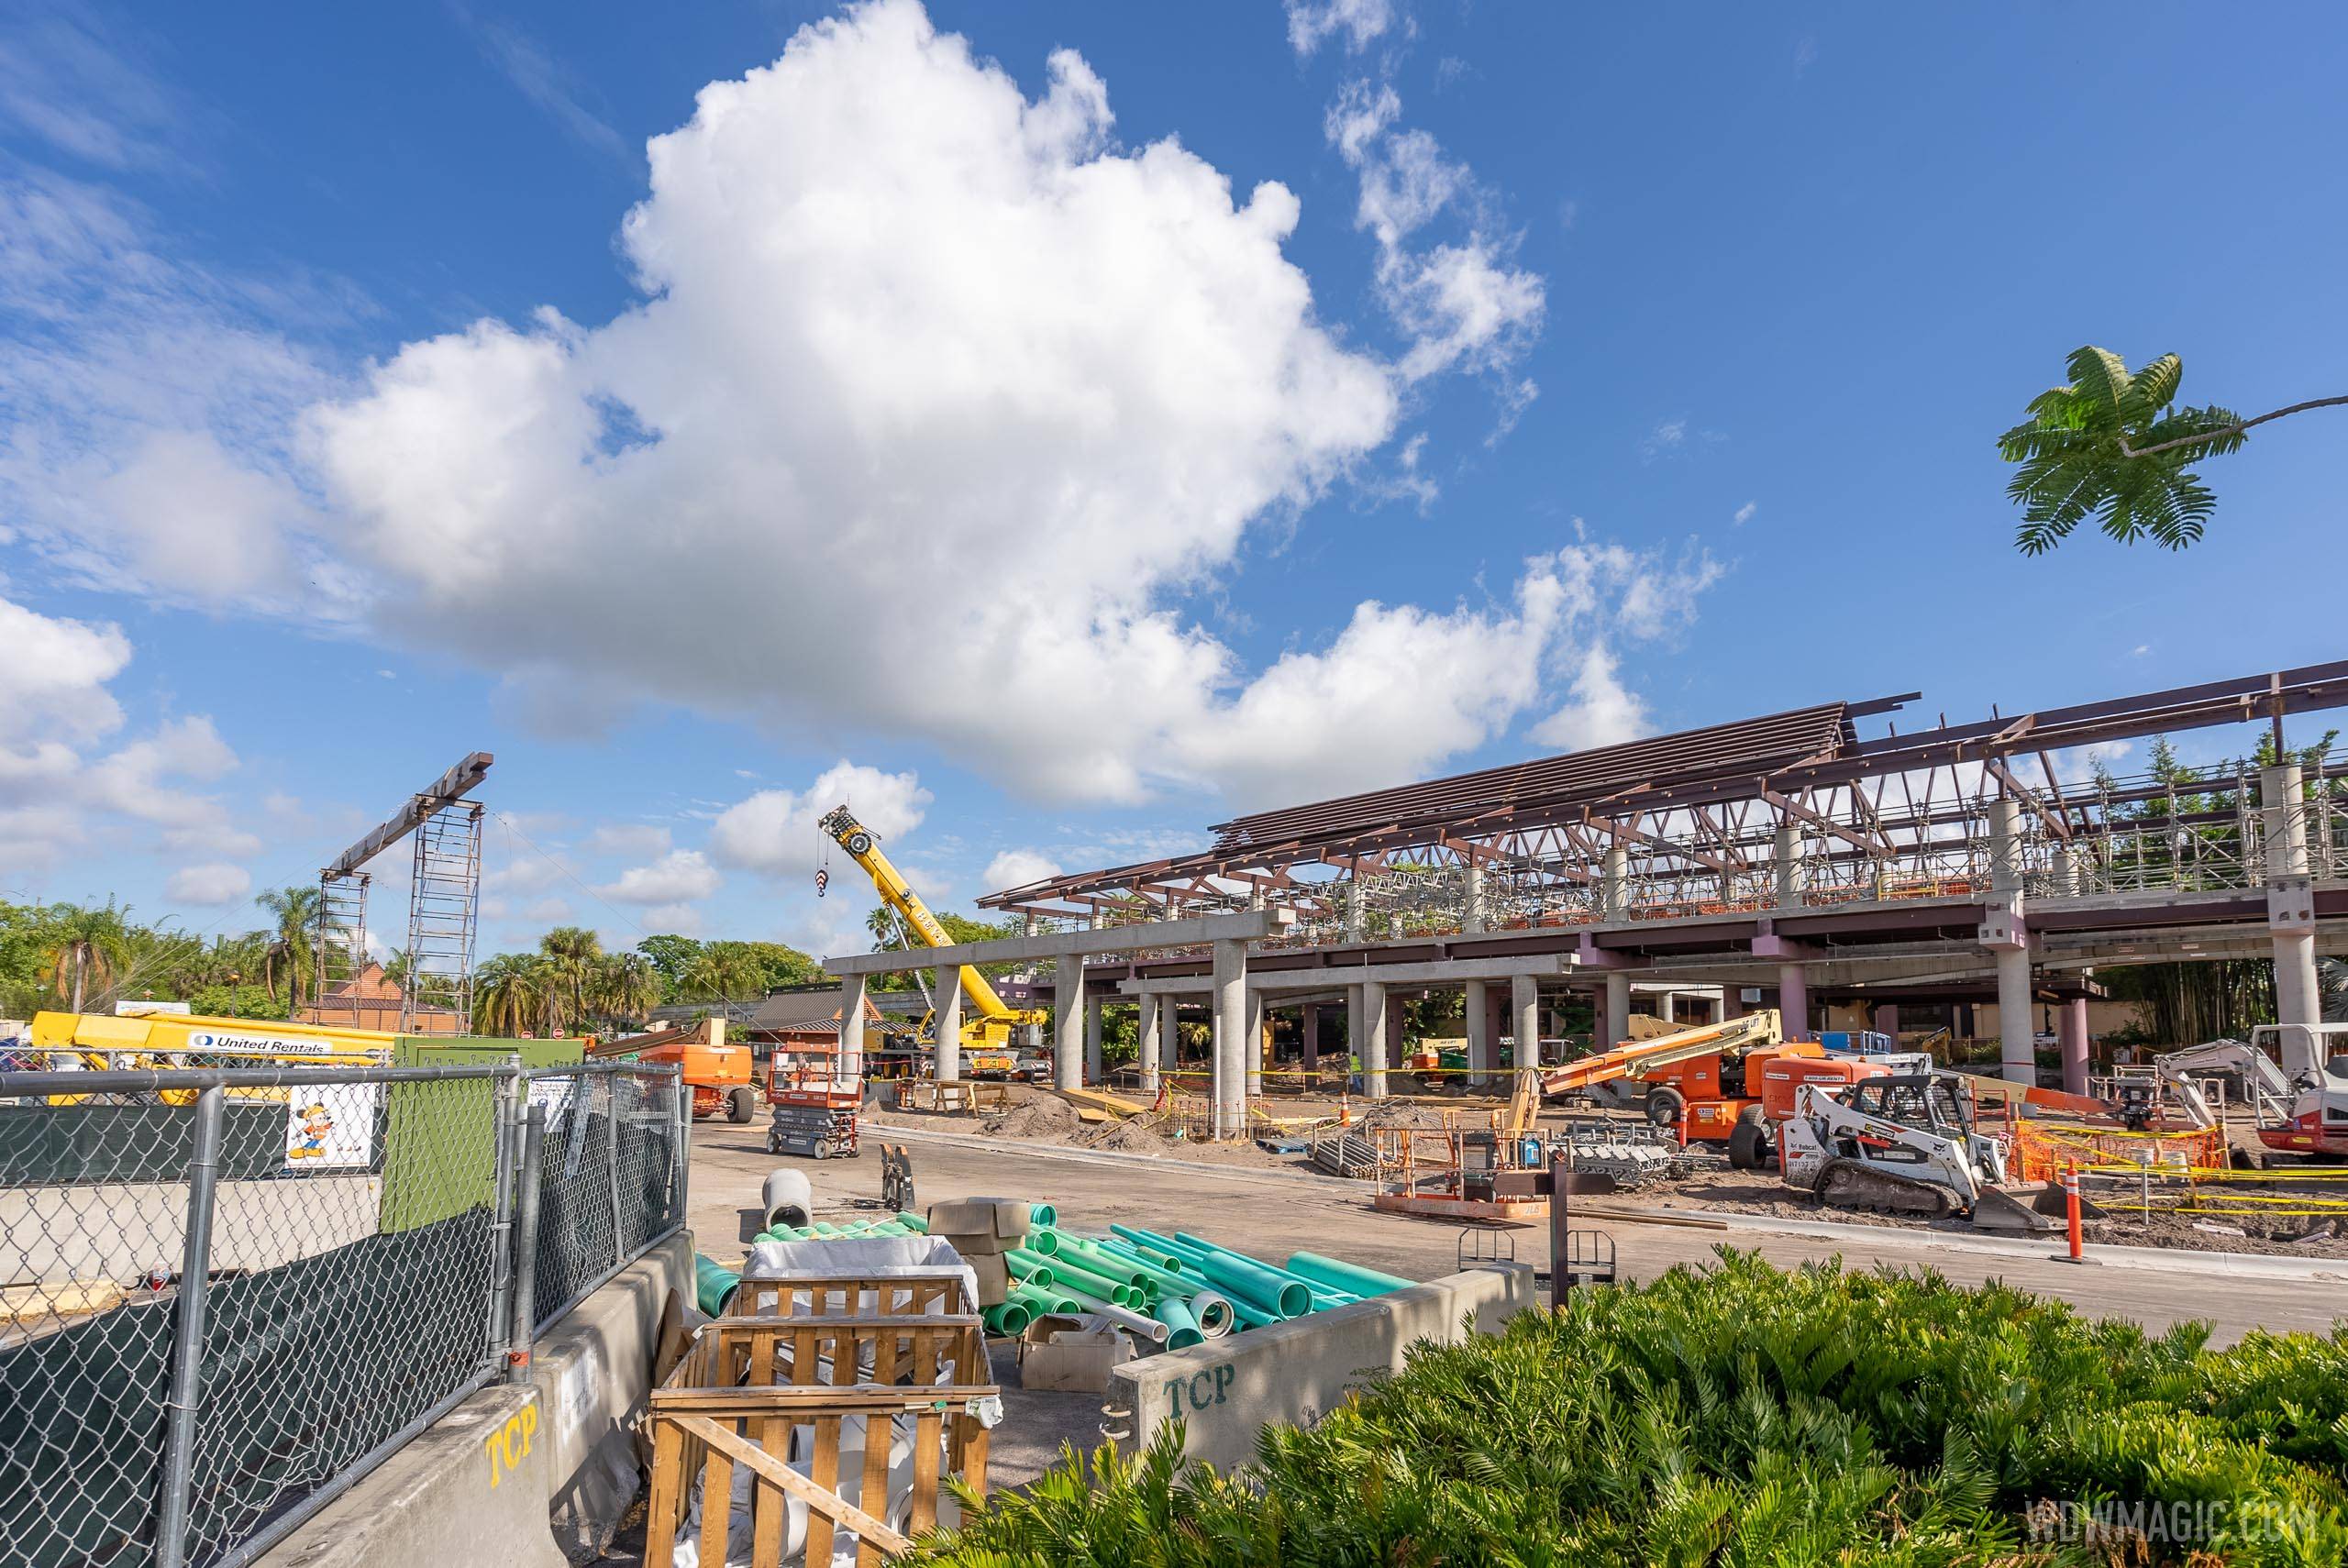 A look at construction of the new monorail station and arrival area at Disney's Polynesian Village Resort